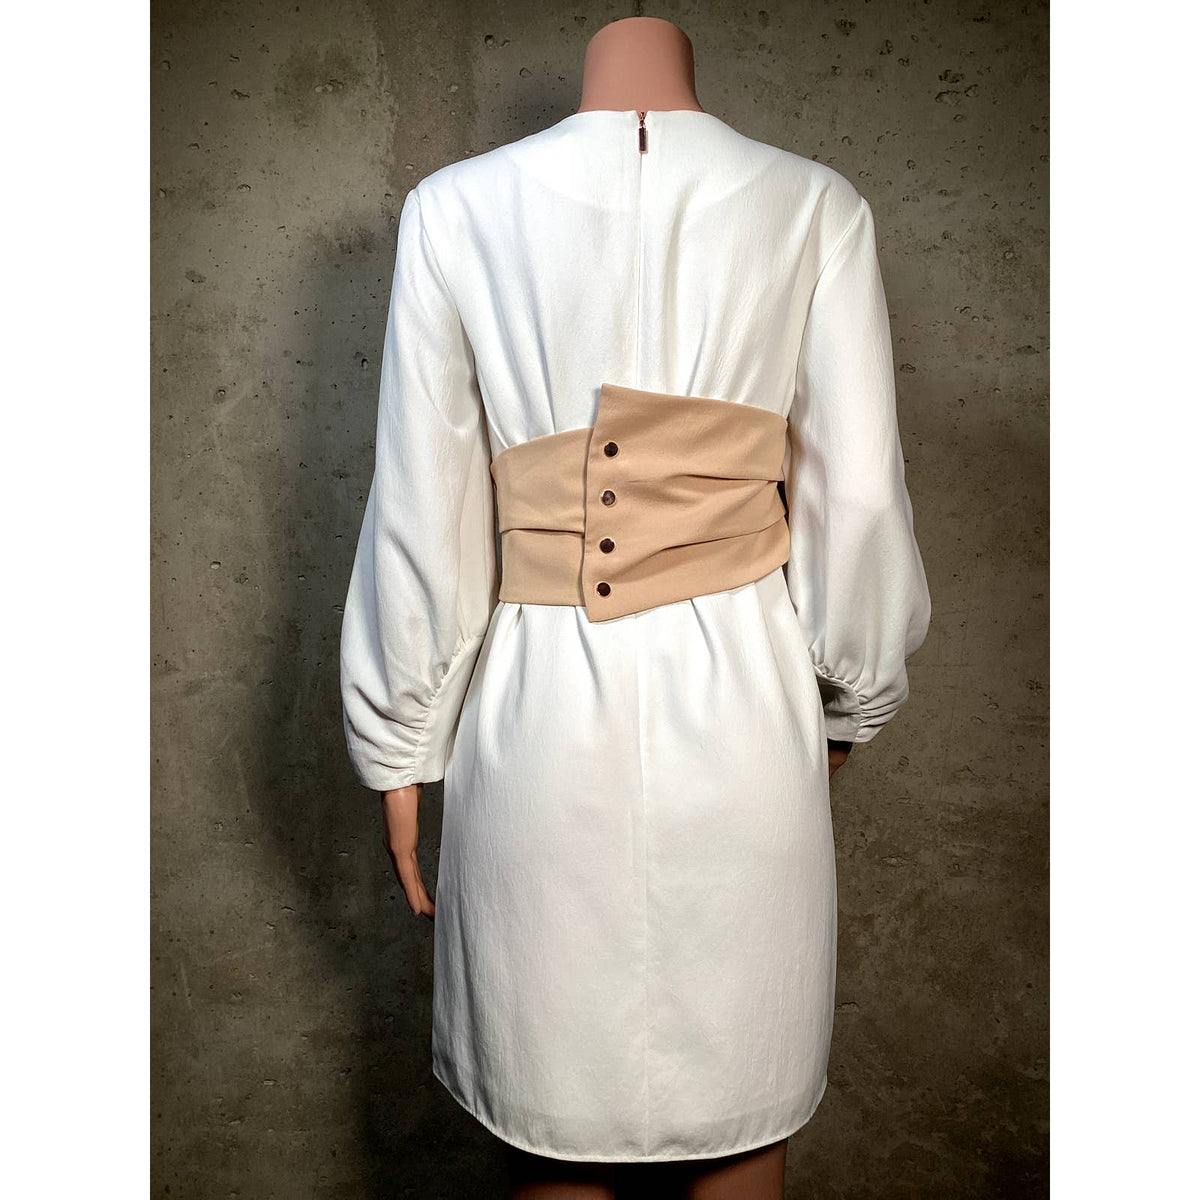 Tibi White and Brown Belted Dress